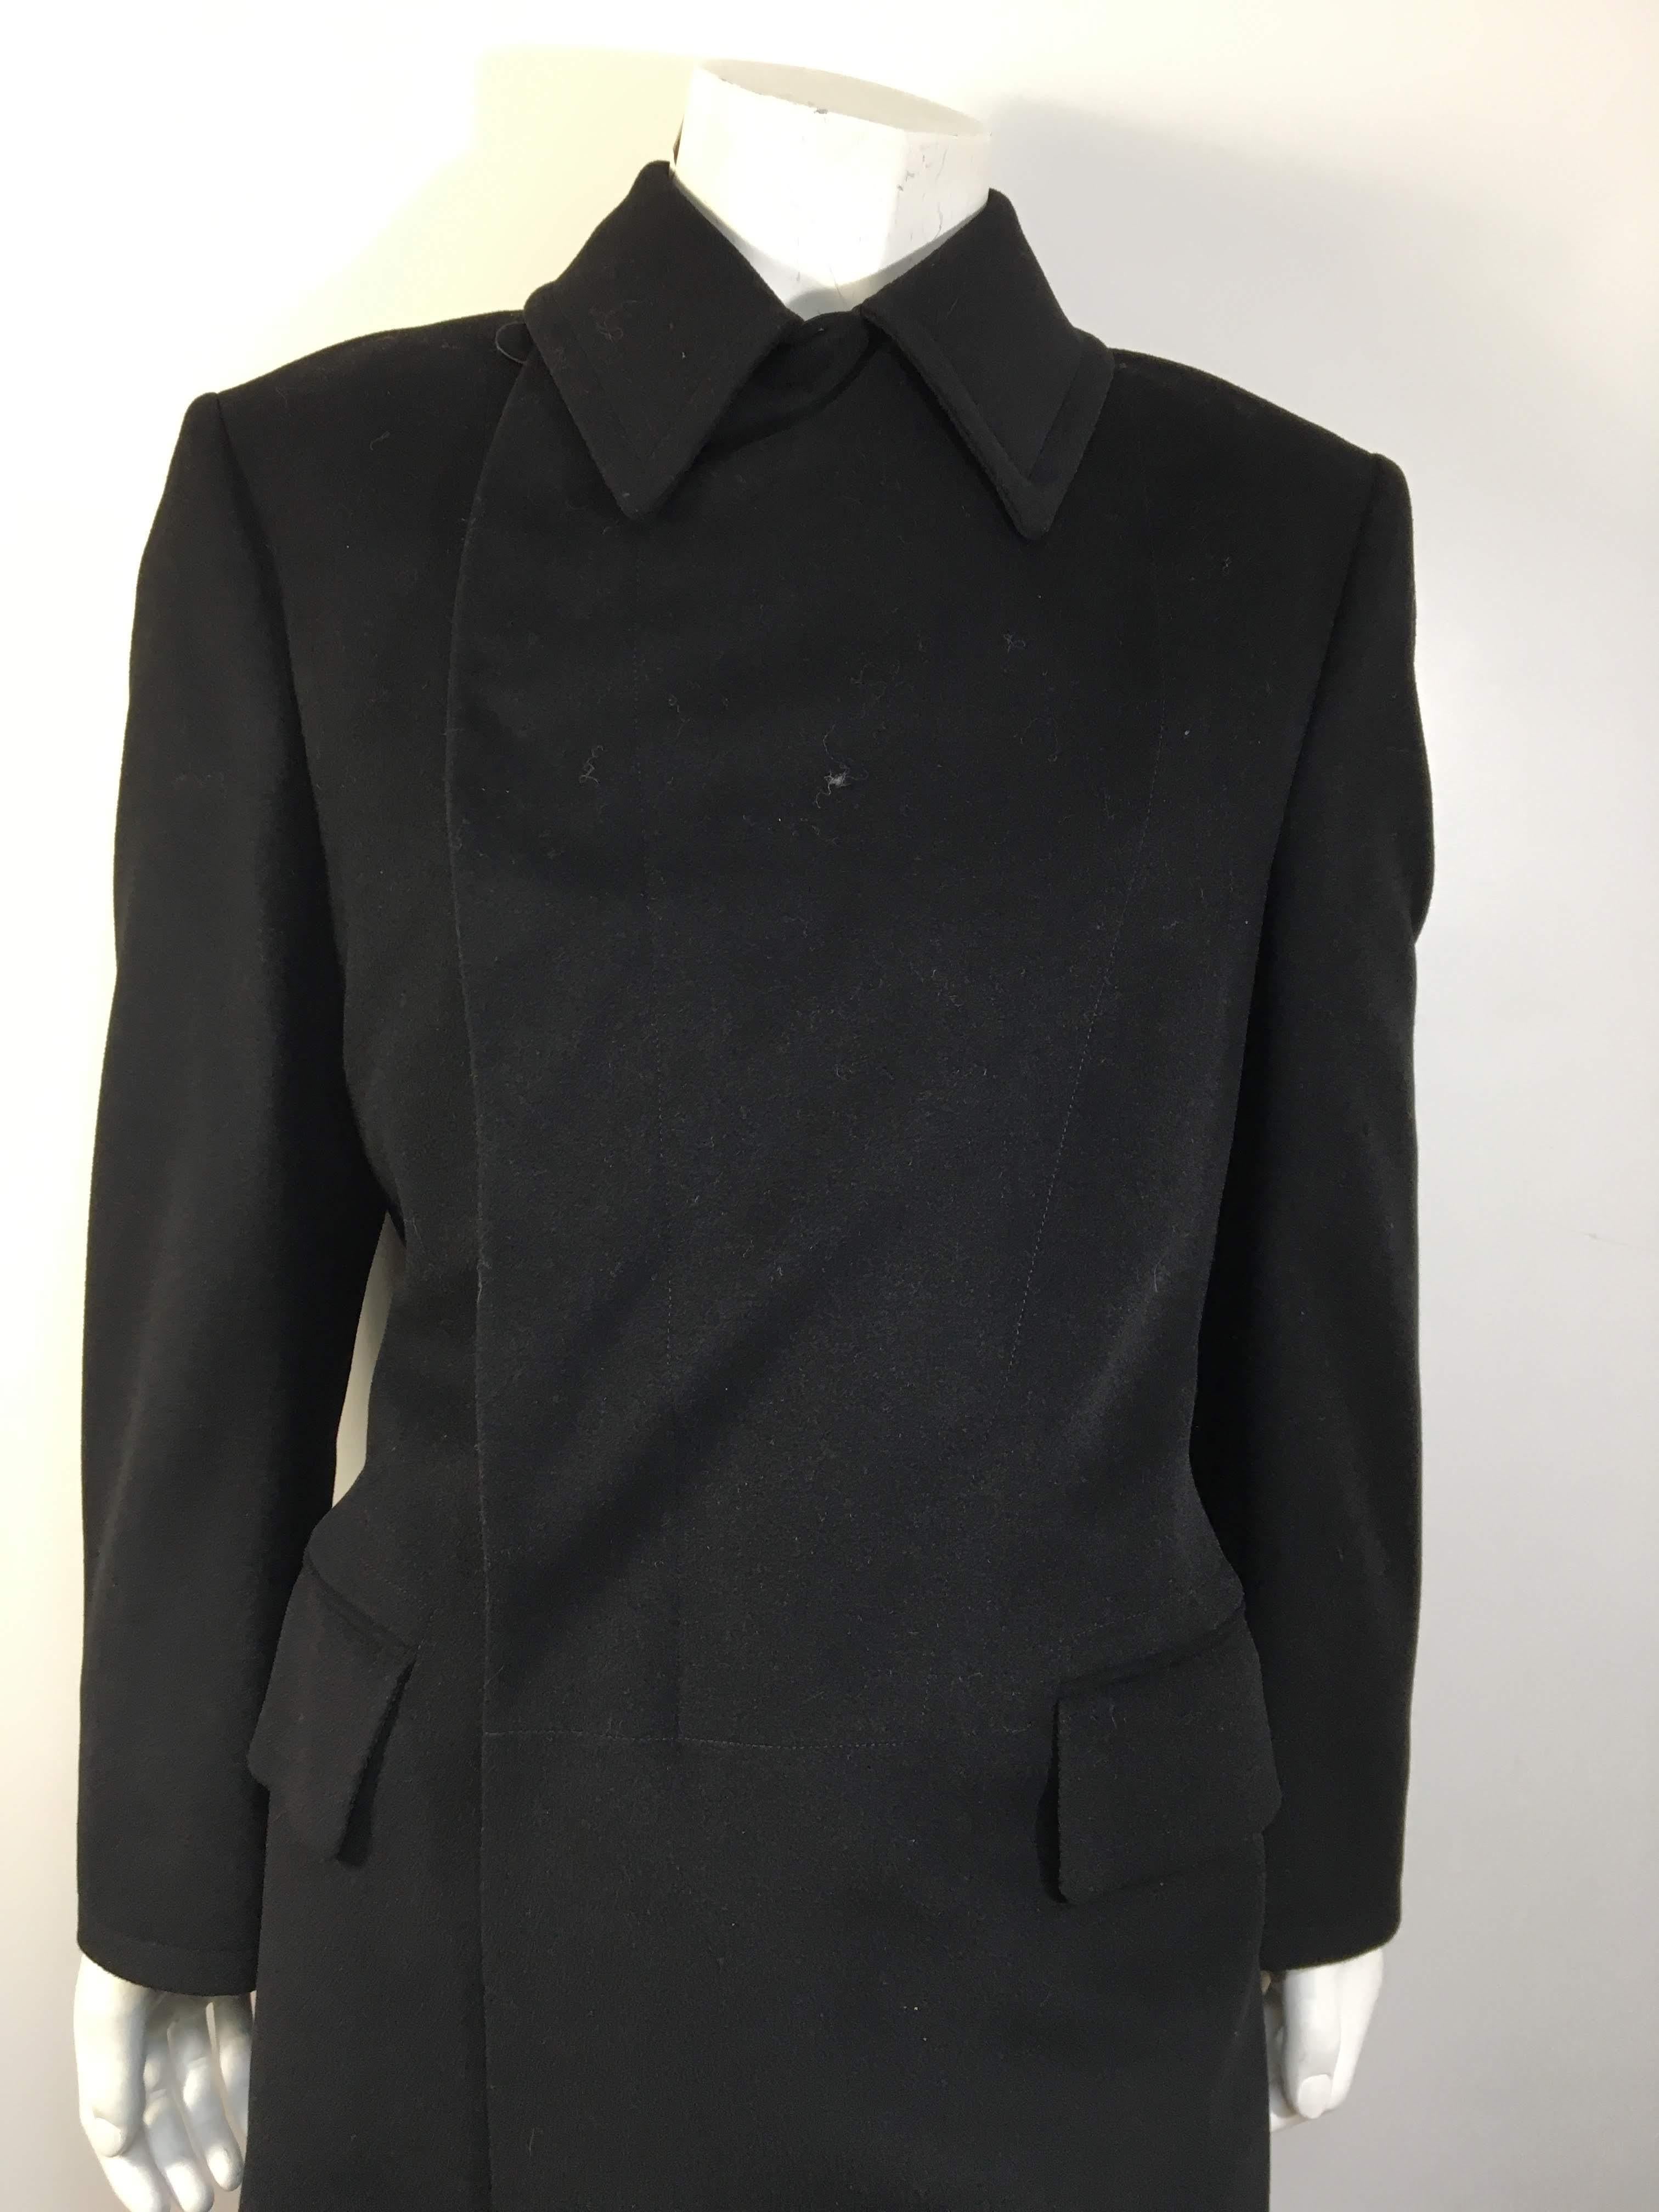 Men's Gucci Black 85% Wool & 15% Cashmere Full Length Trench Coat with 2 Waist Pockets and Buttoned Waist Band at Back
Italian size 48 equates to a Mens Small.